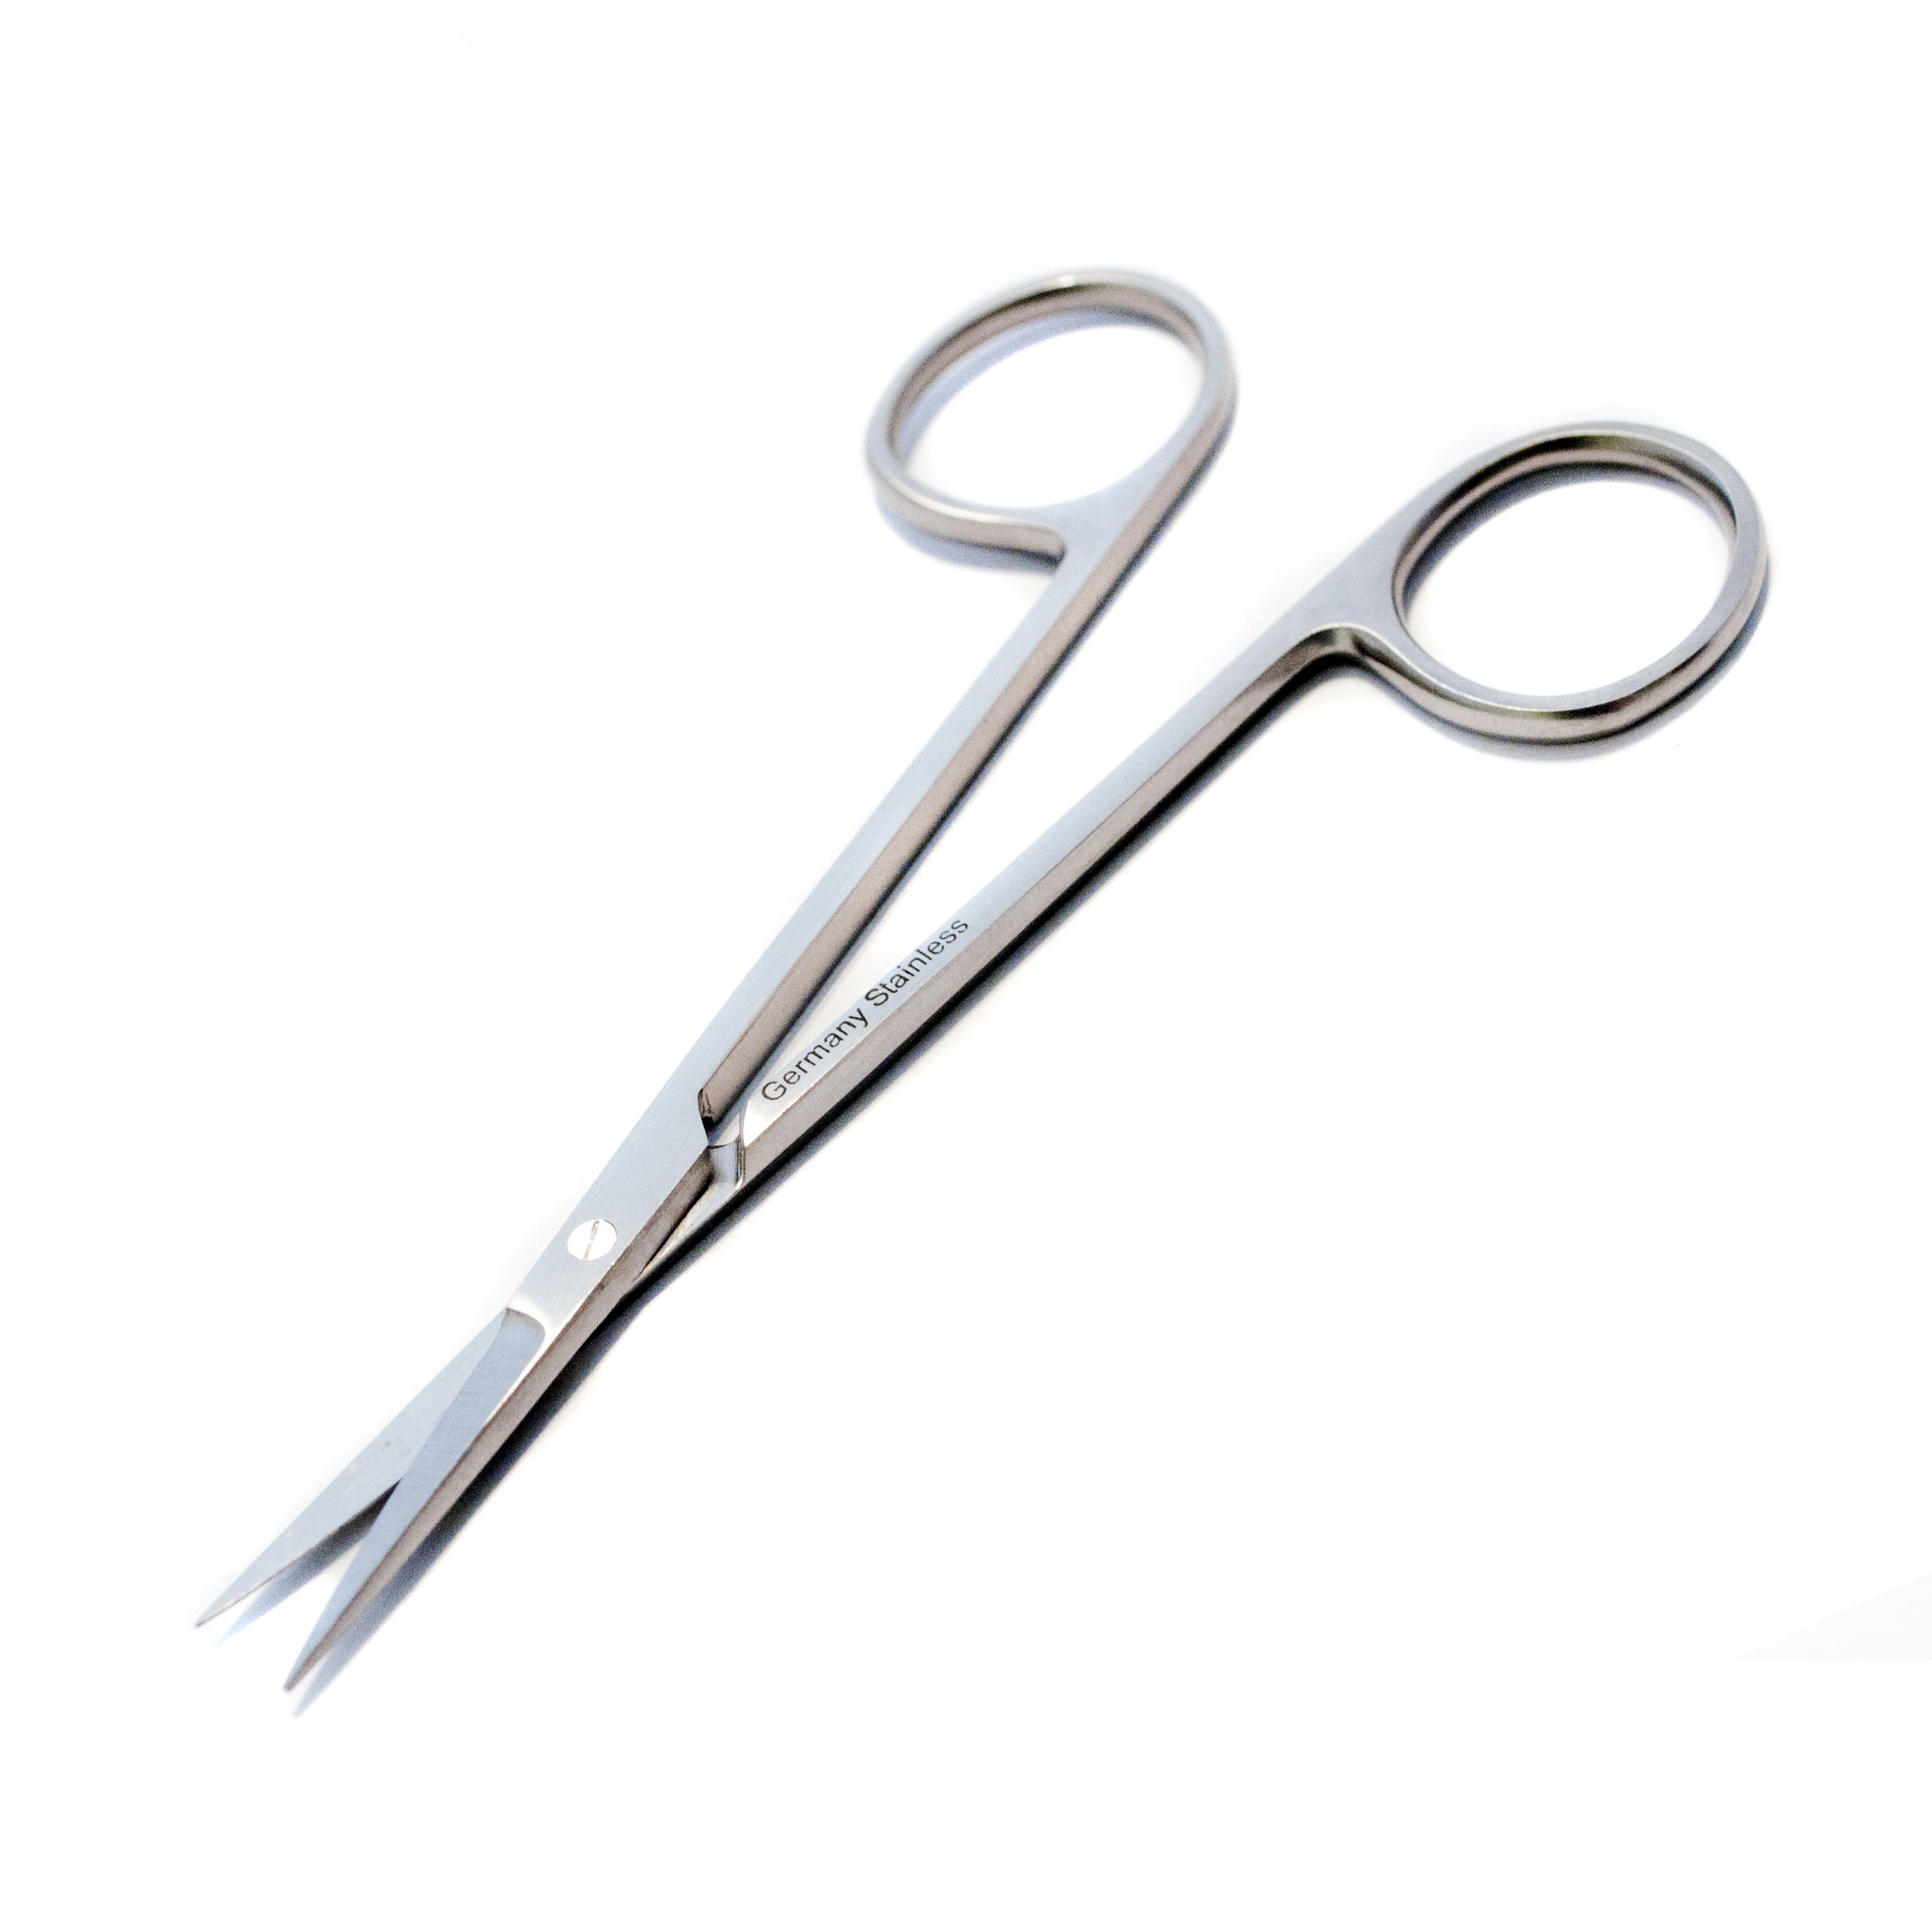 Surgical Scissors Made in USA  Bianco Instruments Bandage, Iris